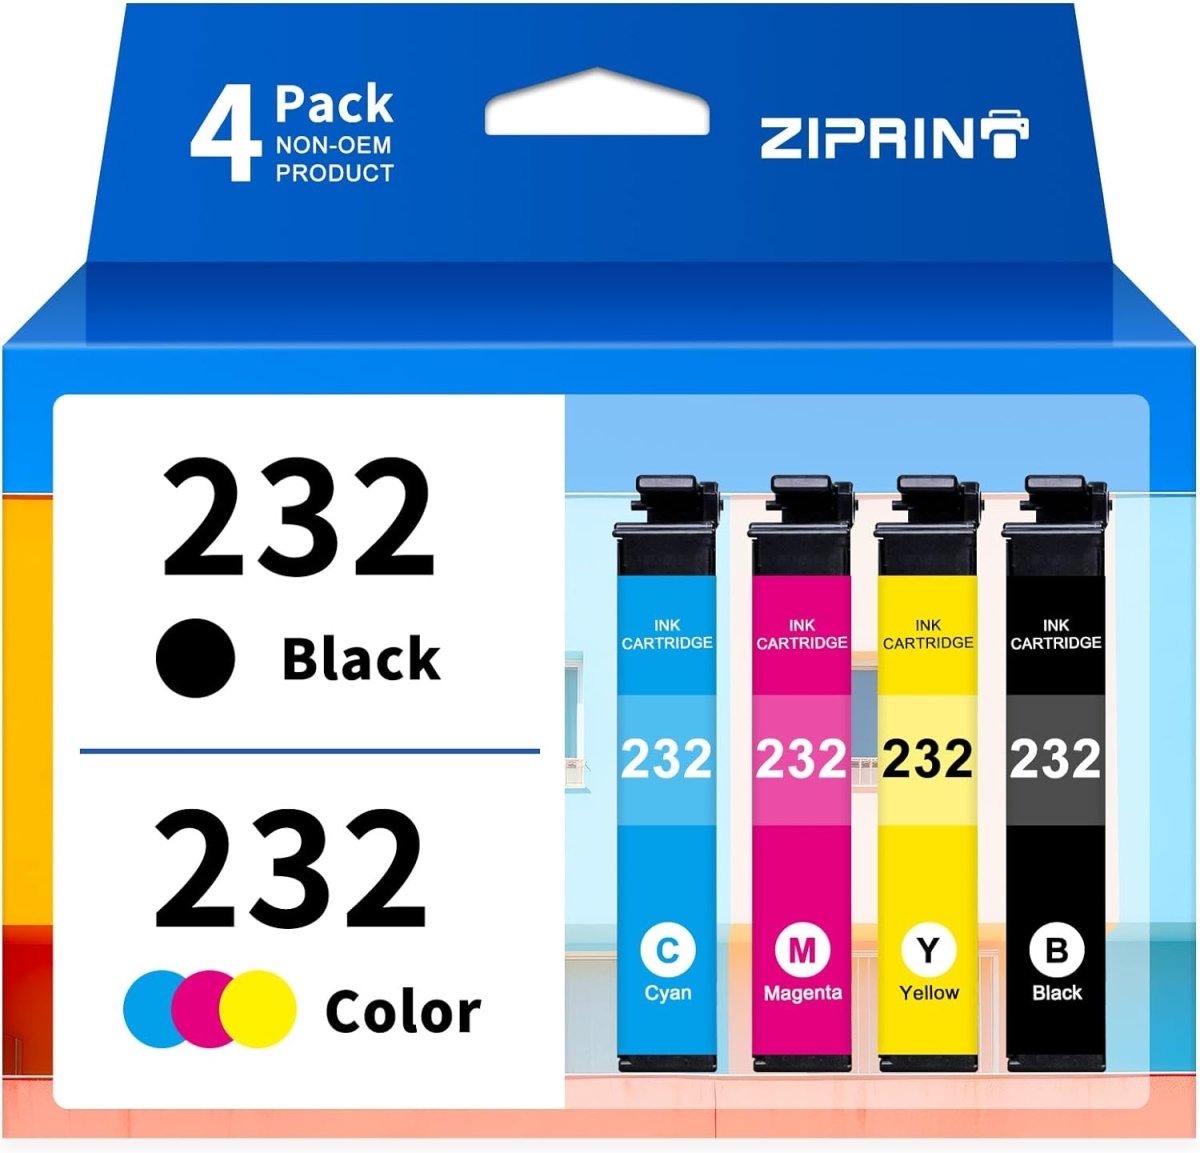 Remanufactured high-capacity Epson 232XL ink cartridges 4 pack